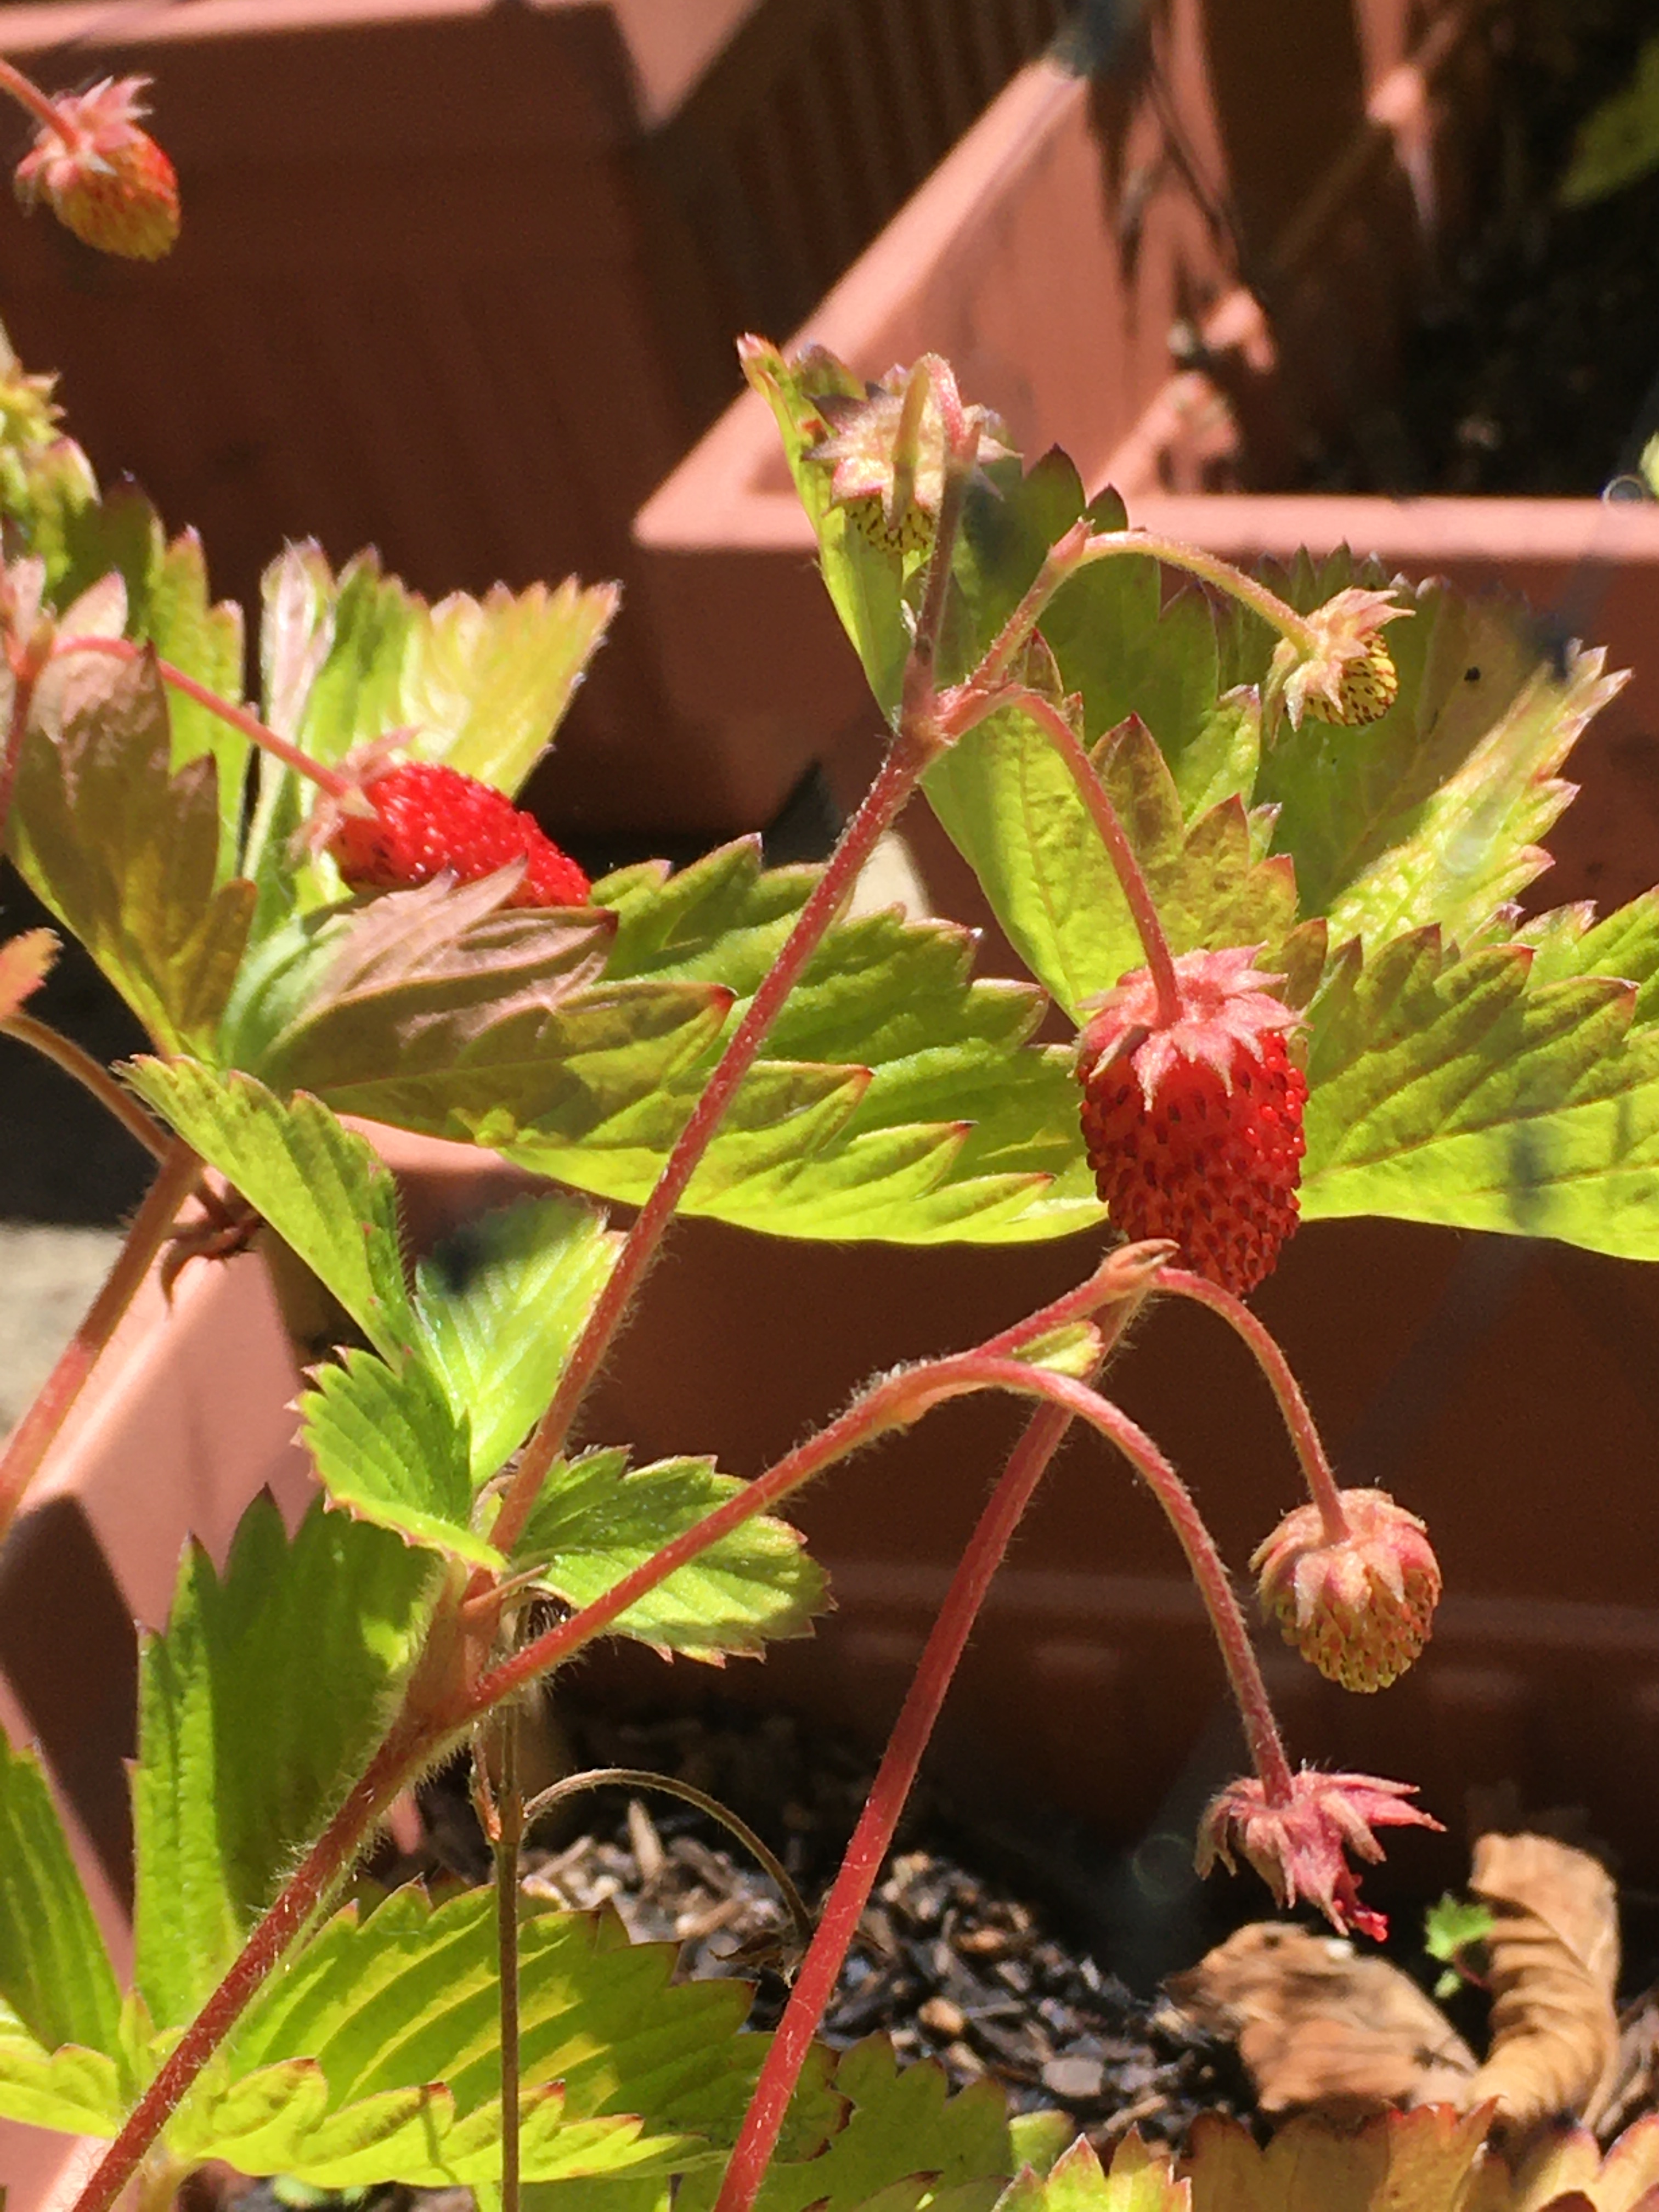 Photo of a small strawberry on the plant